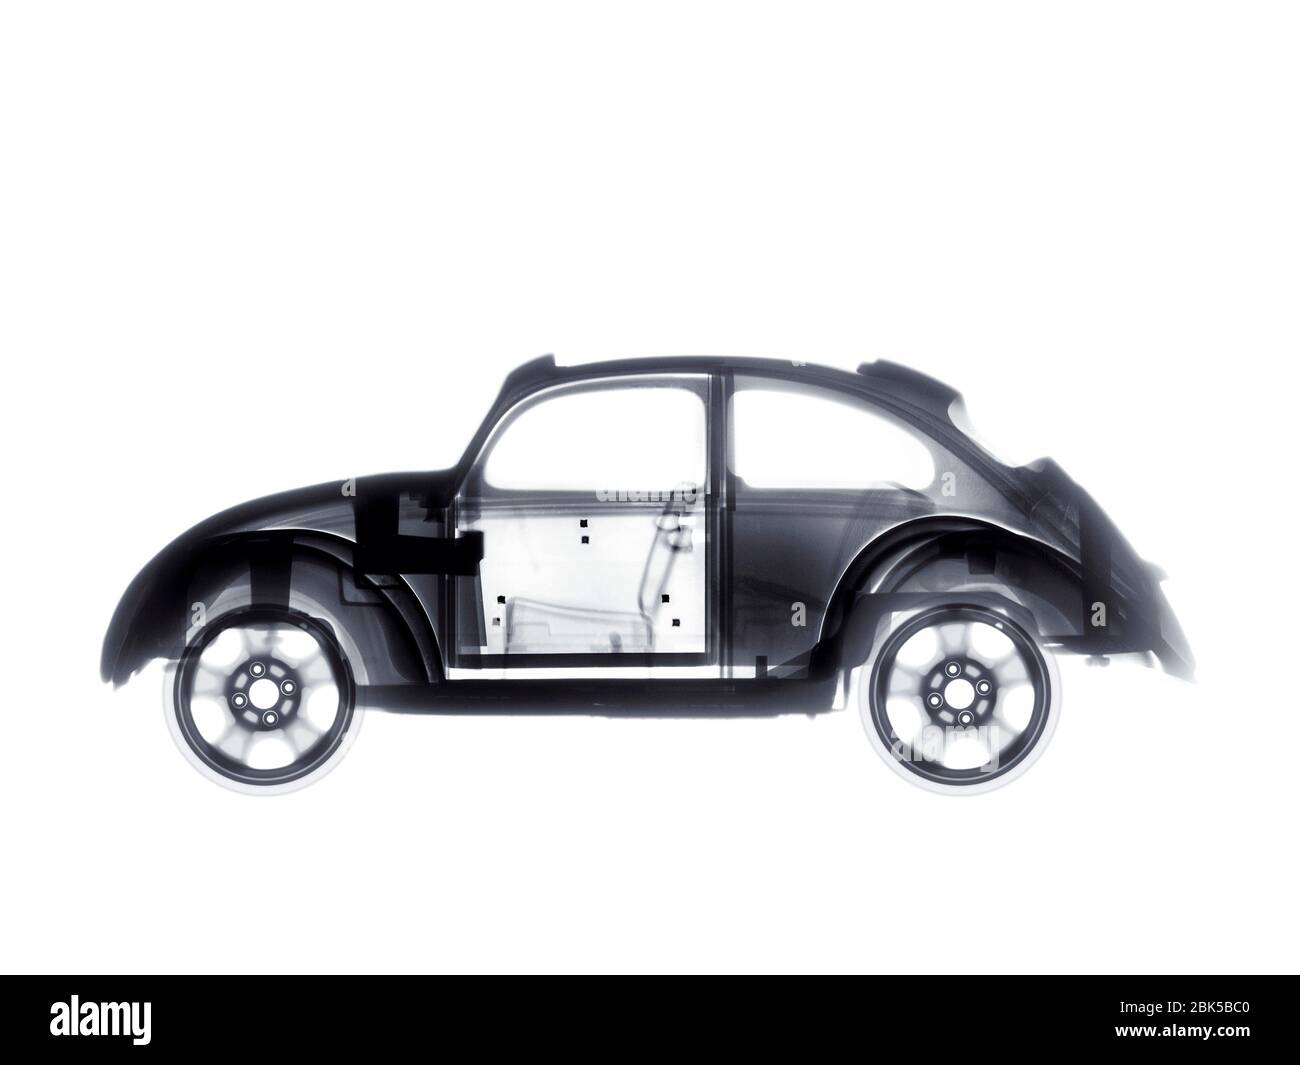 Toy Volkswagen beetle car, X-ray. Stock Photo